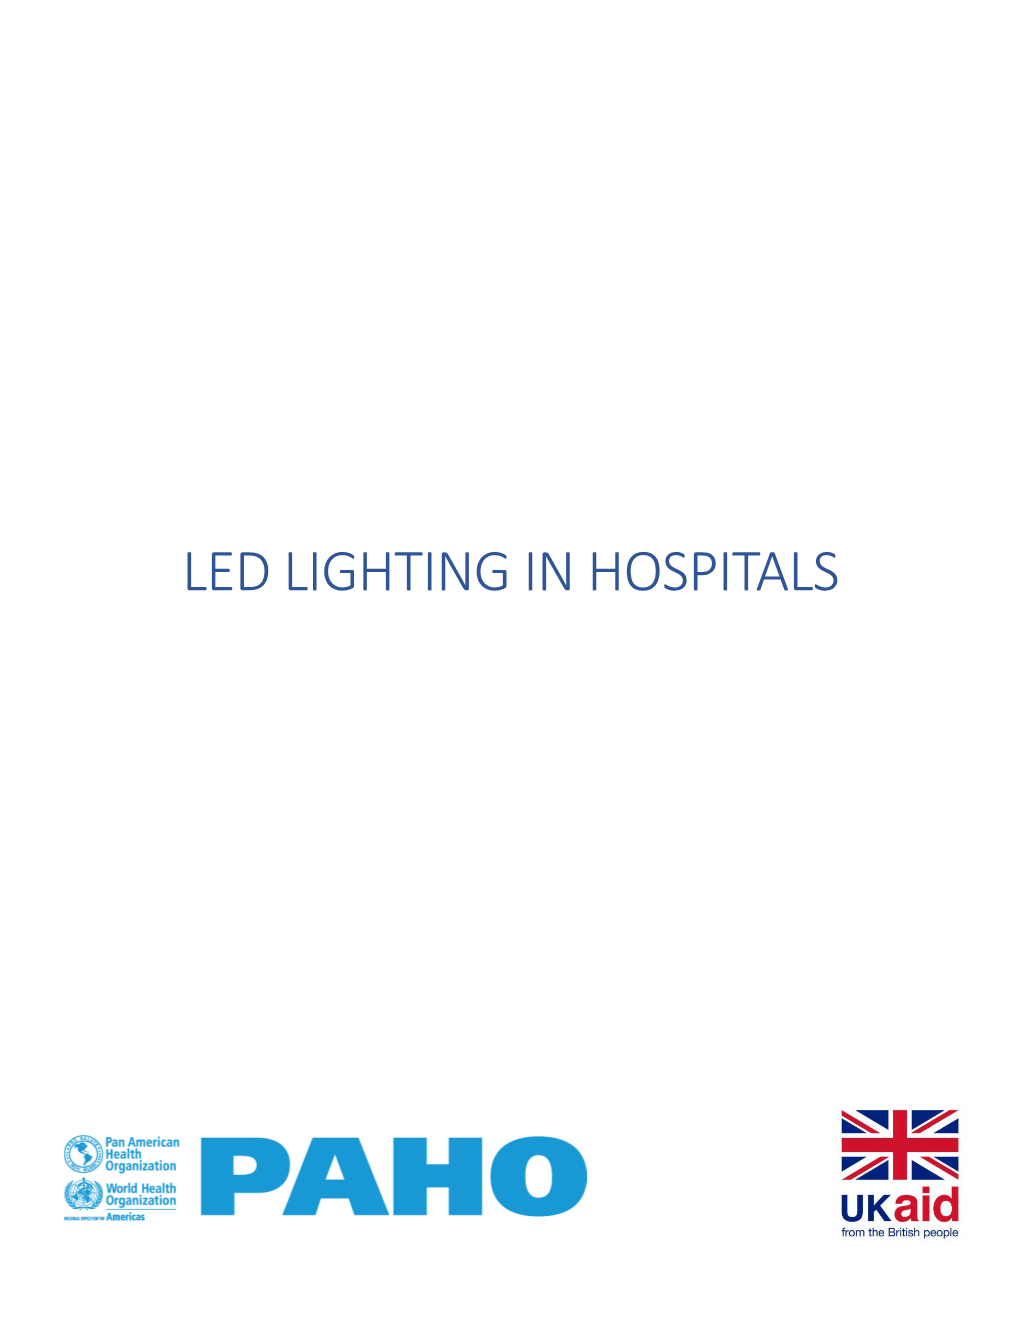 Led Lighting in Hospitals